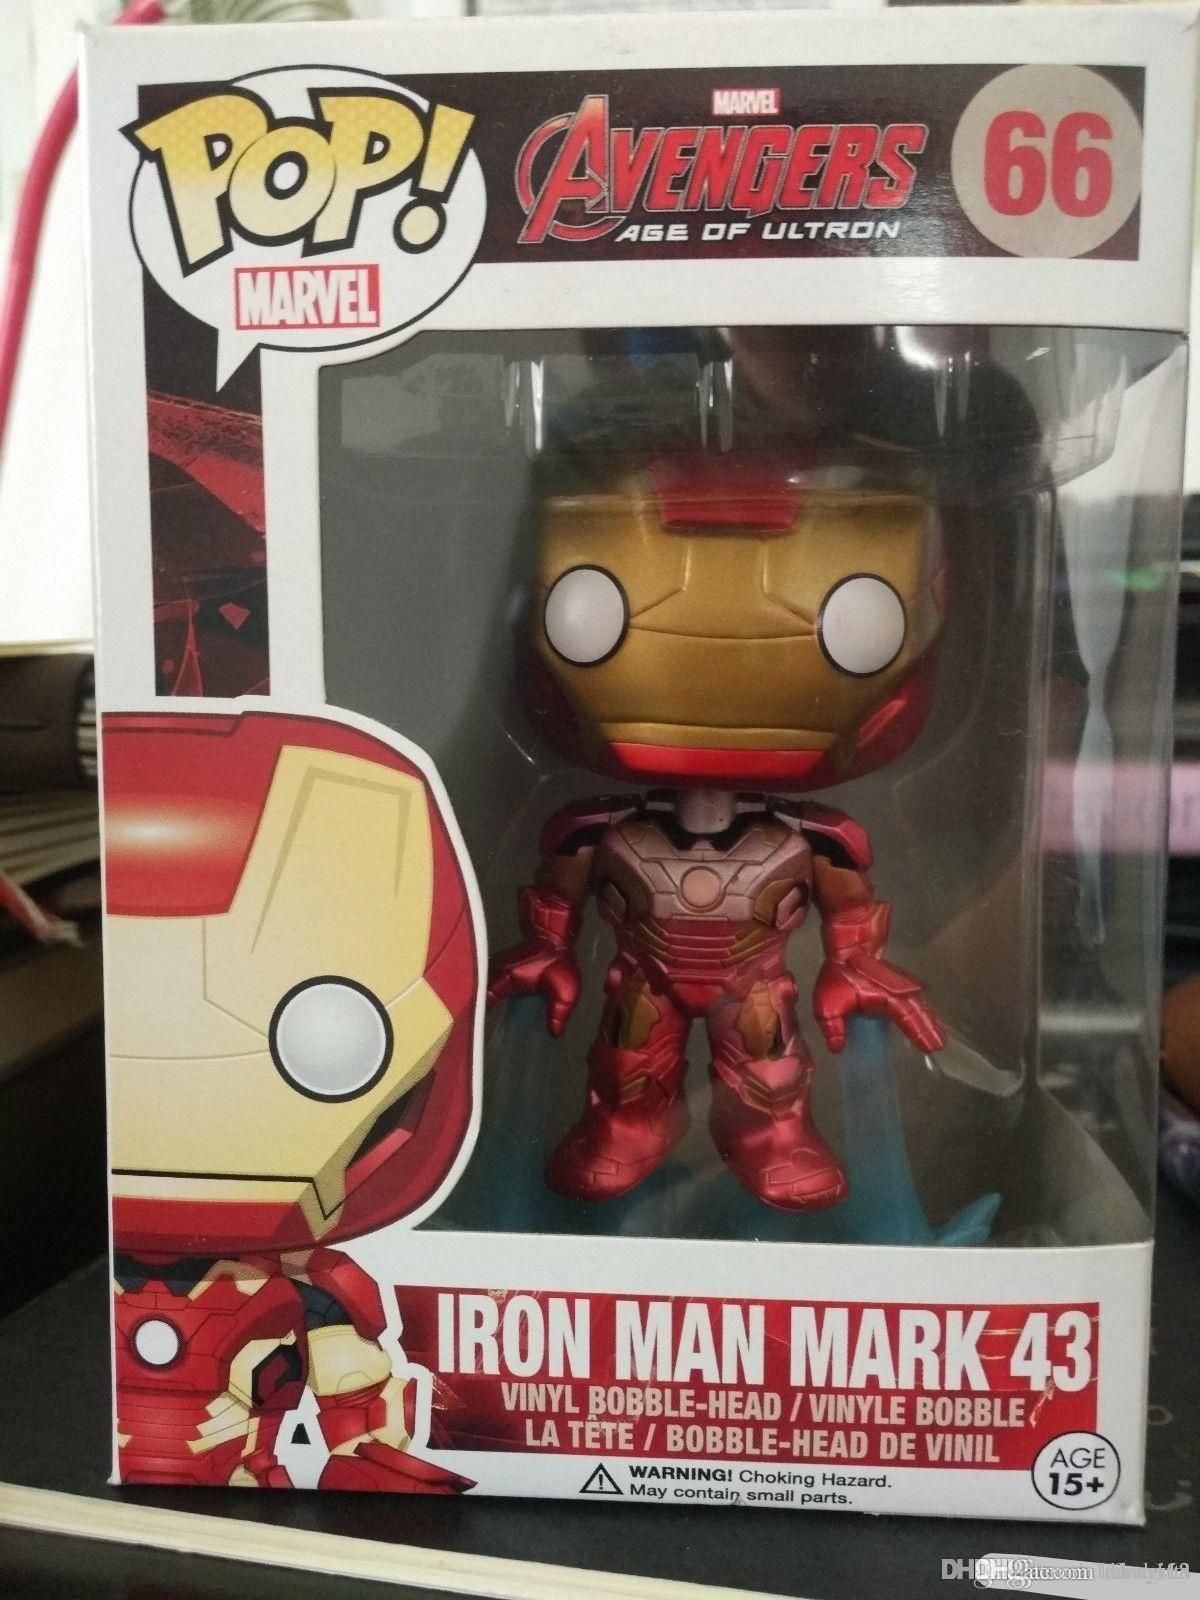 2020 Cute Lxh Funko Pop Iron Man Mark 43 Avengers Age Of Ultron Bobble Head Vinyl Action Figure With Box 177 Toy Gift From Cutetoyss 11 06 Dhgate Com - roblox iron man mark 48